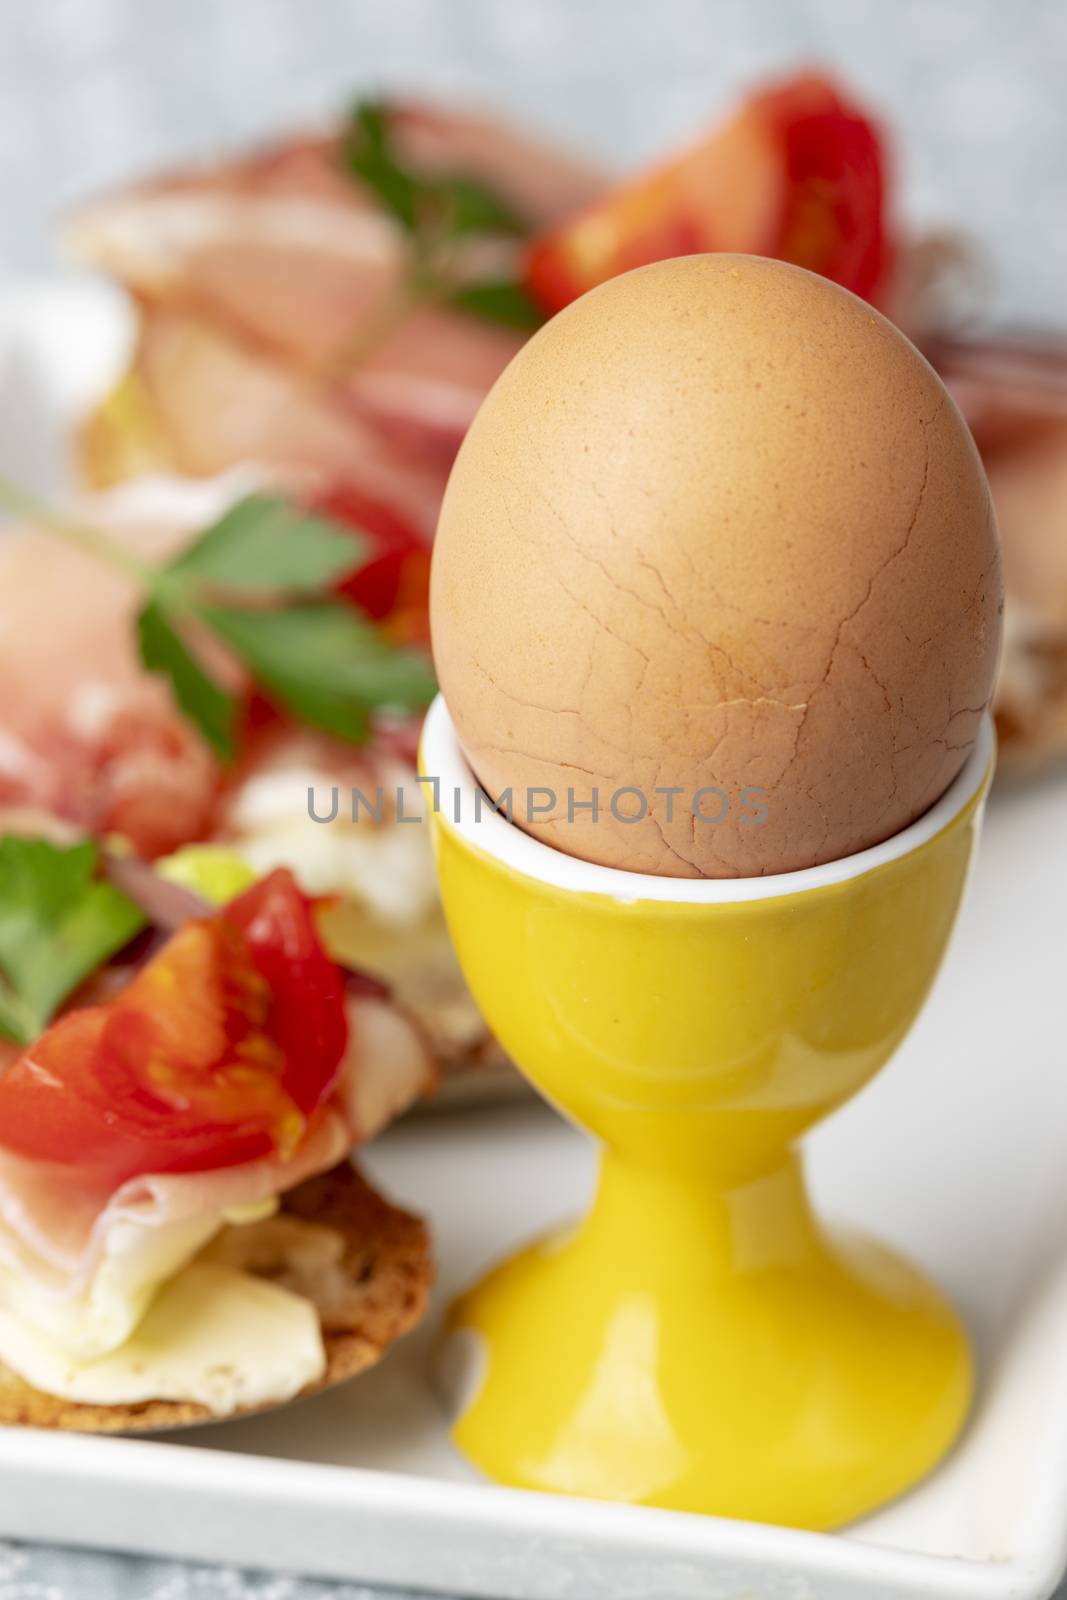 egg in an egg cup for breakfast